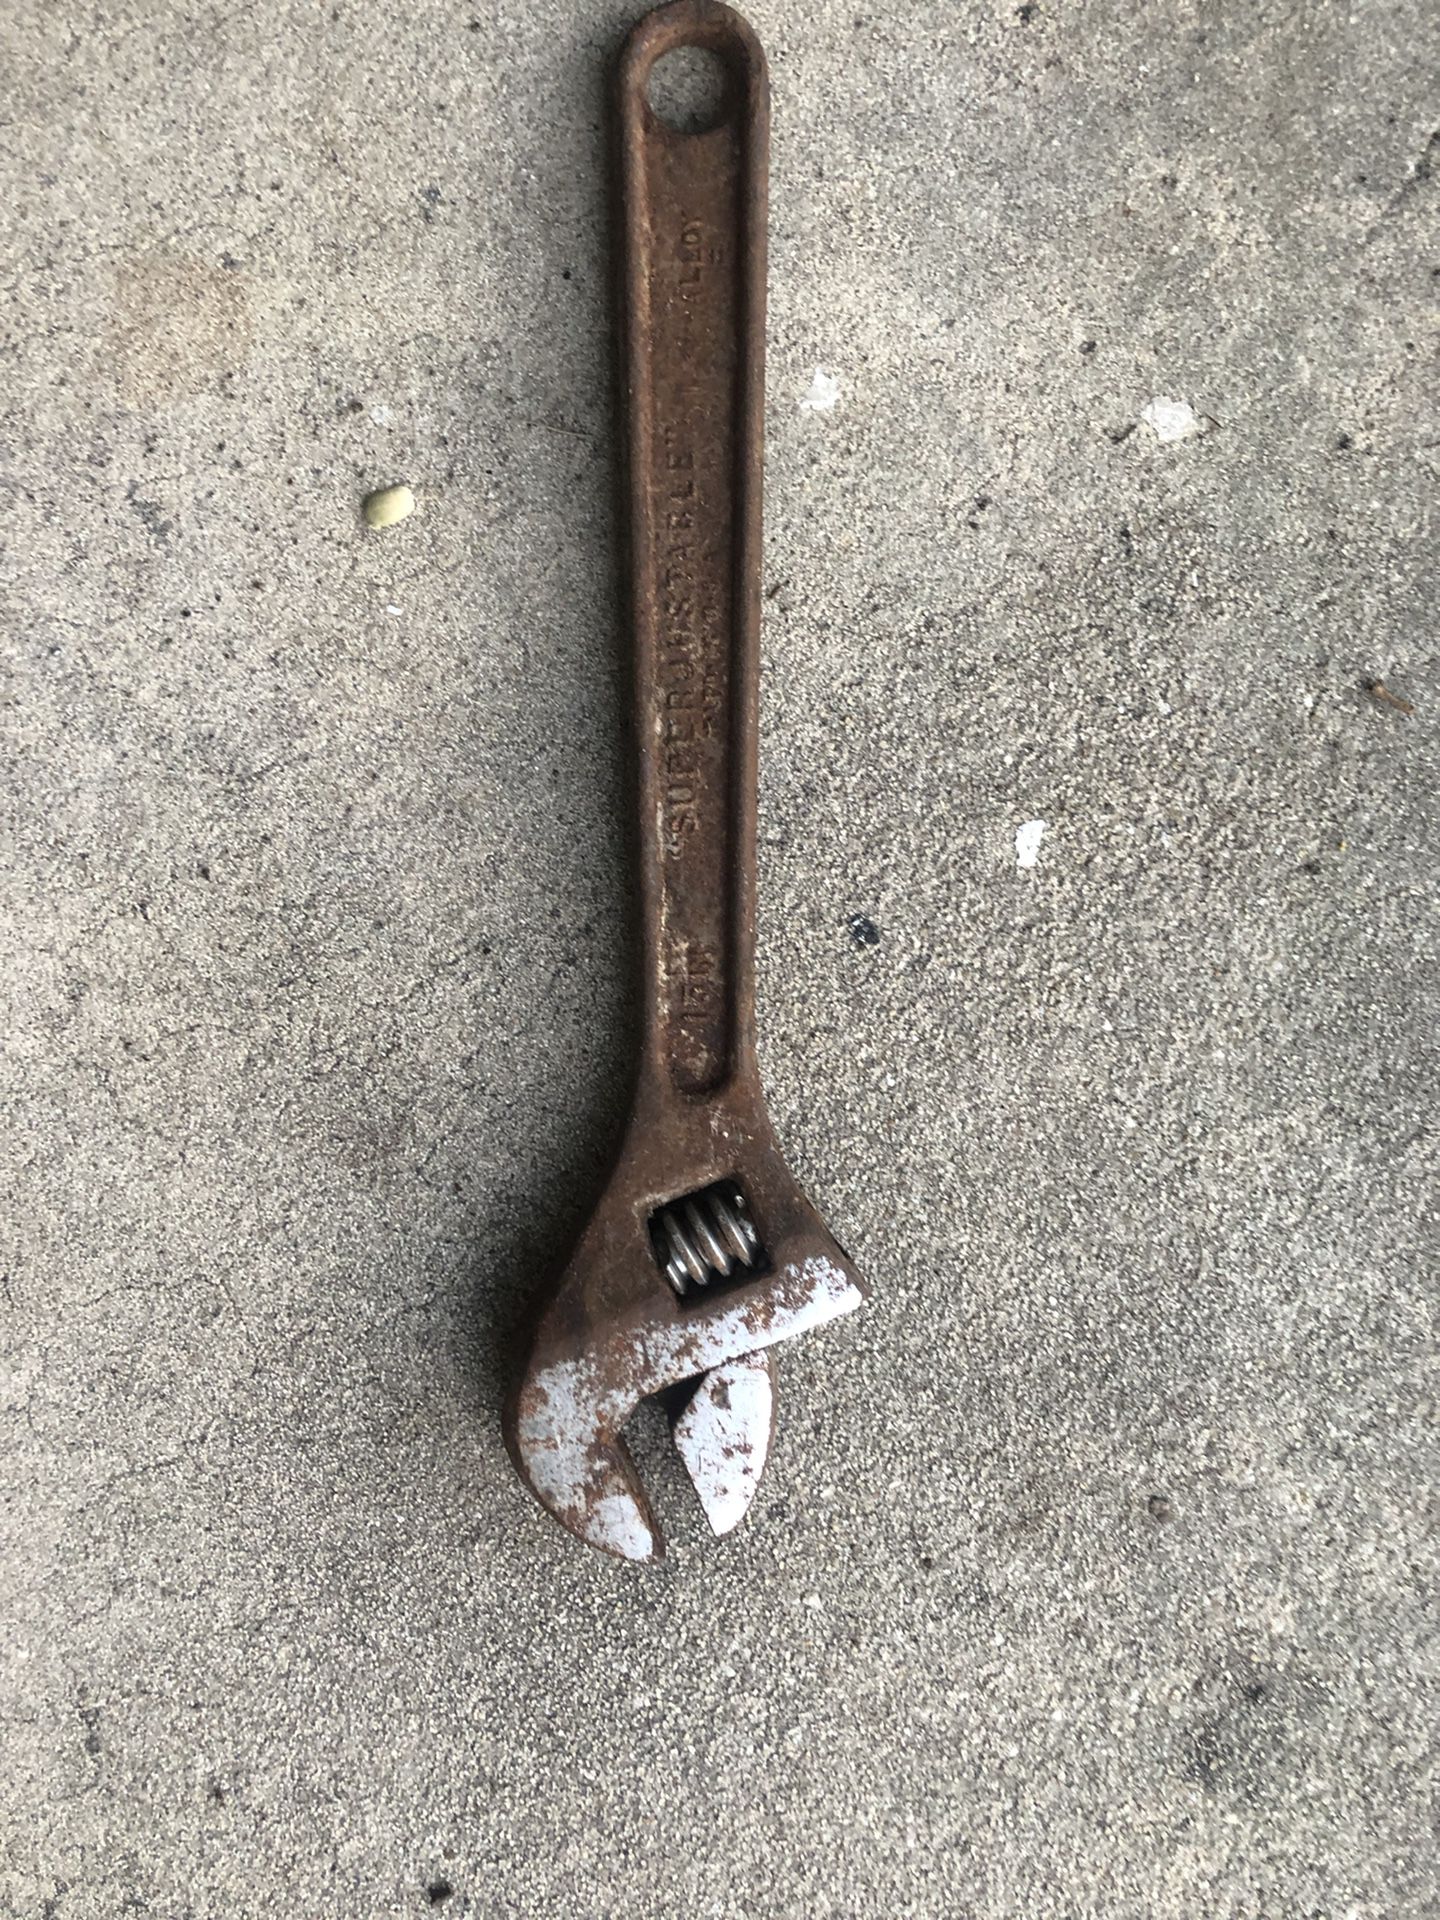  JH Williams Super Wrench , 18" AdjusTable Crescent Wrench Rare Vintage Tool 